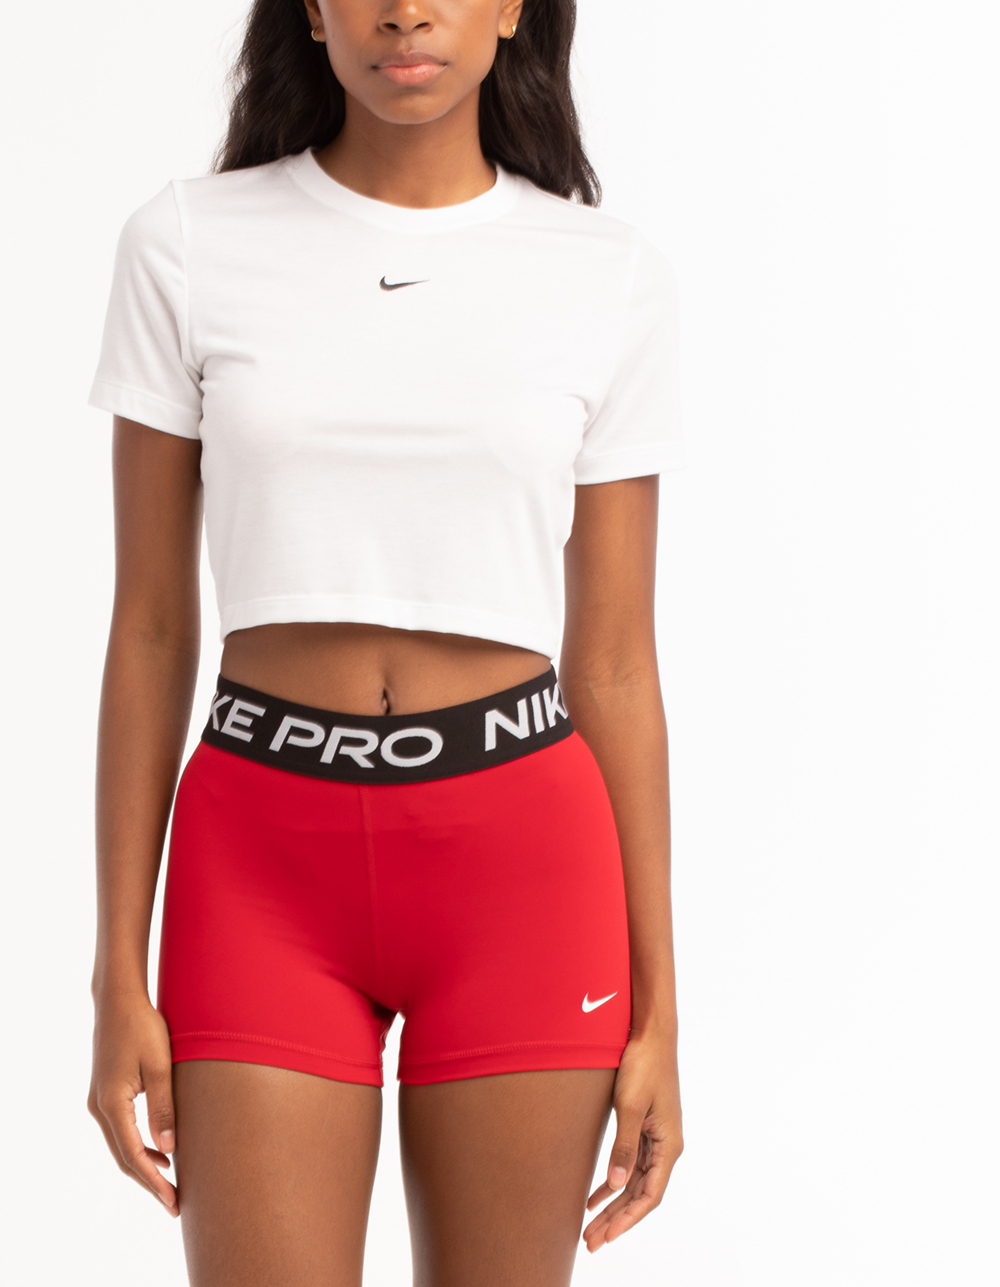 Nike Training Pro 365 3-Inch Legging Shorts In Red, 53% OFF